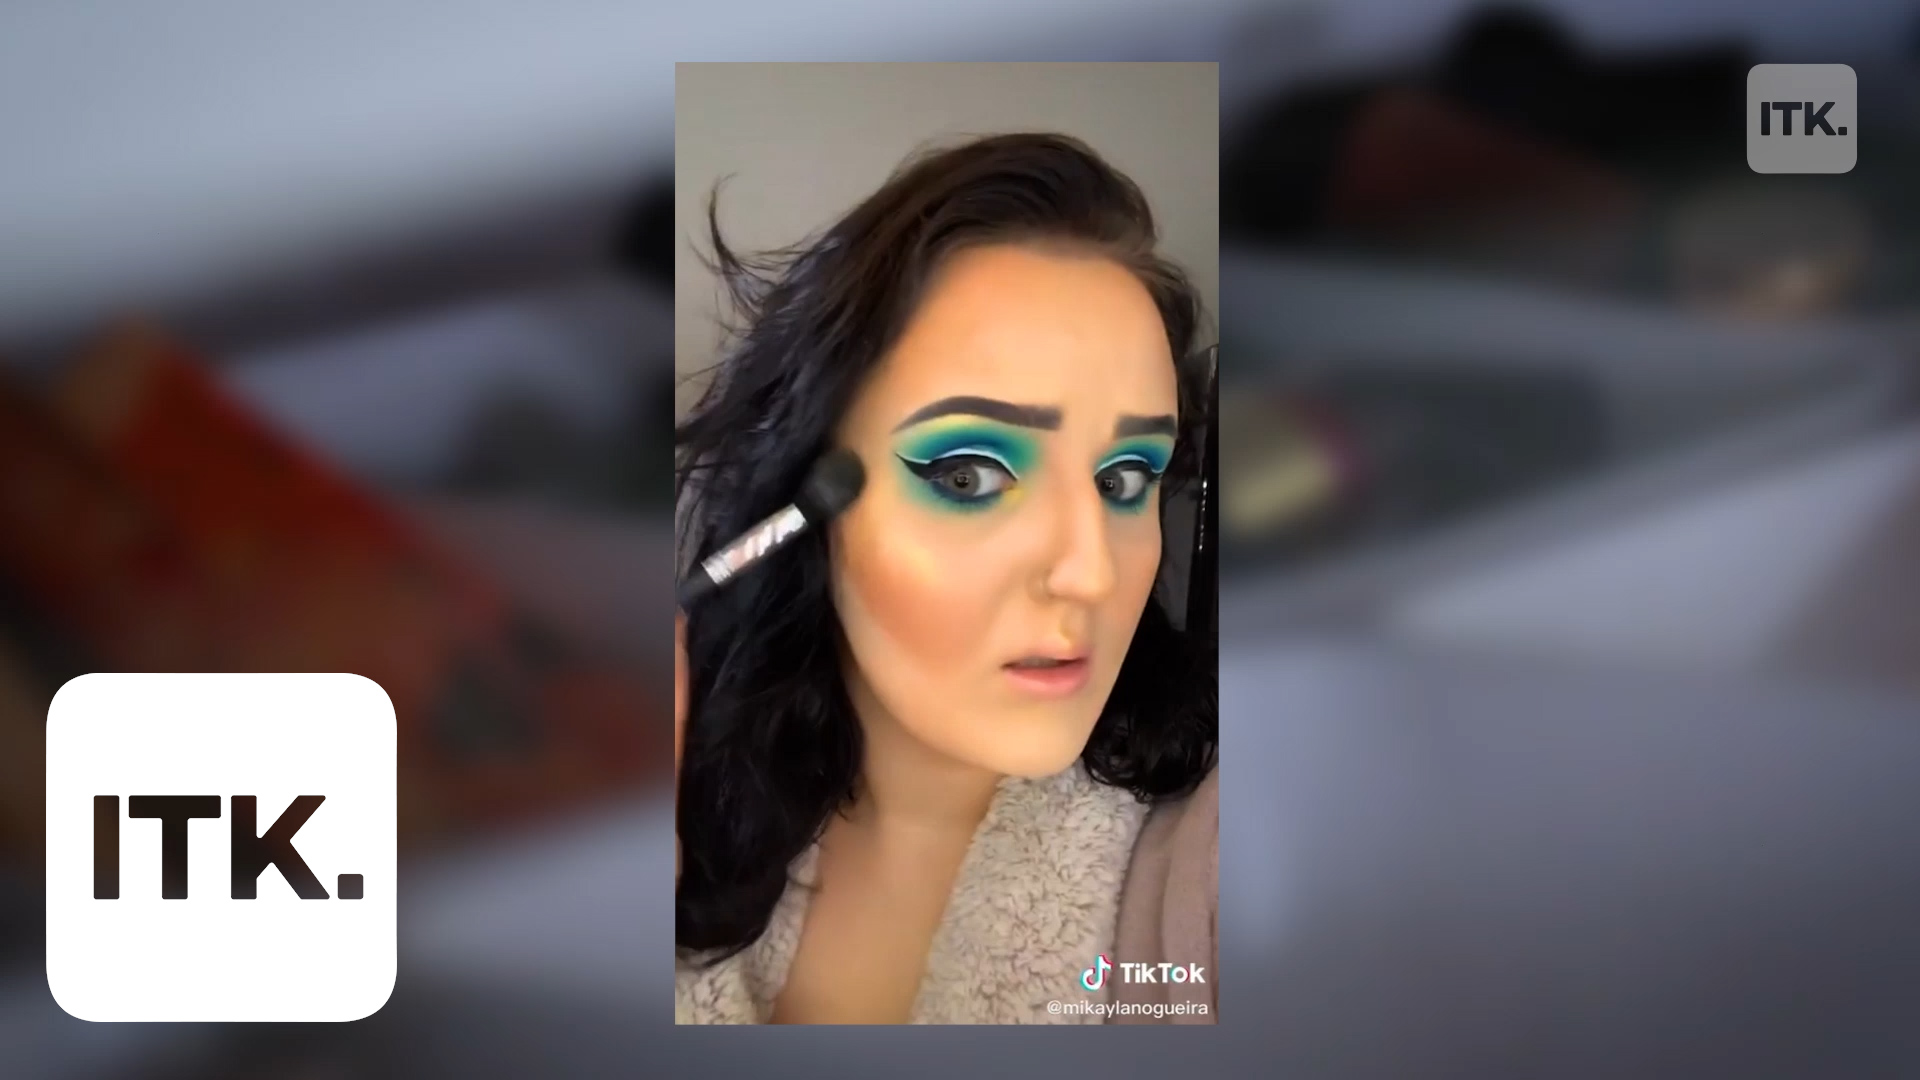 Mikayla Nogueira is the TikTok beauty guru known for her